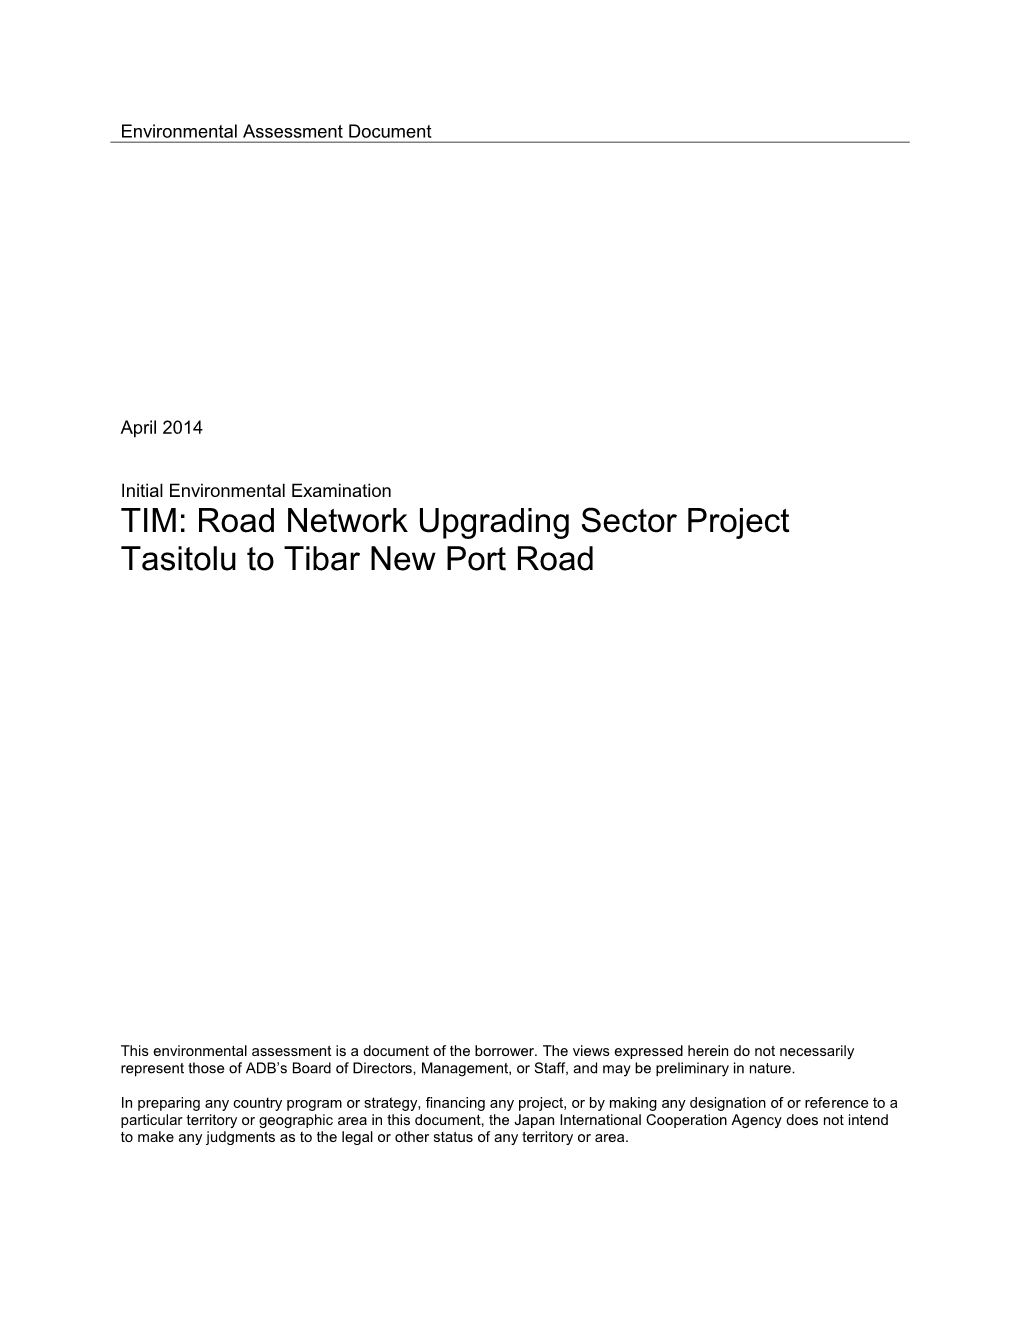 Road Network Upgrading Sector Project Tasitolu to Tibar New Port Road